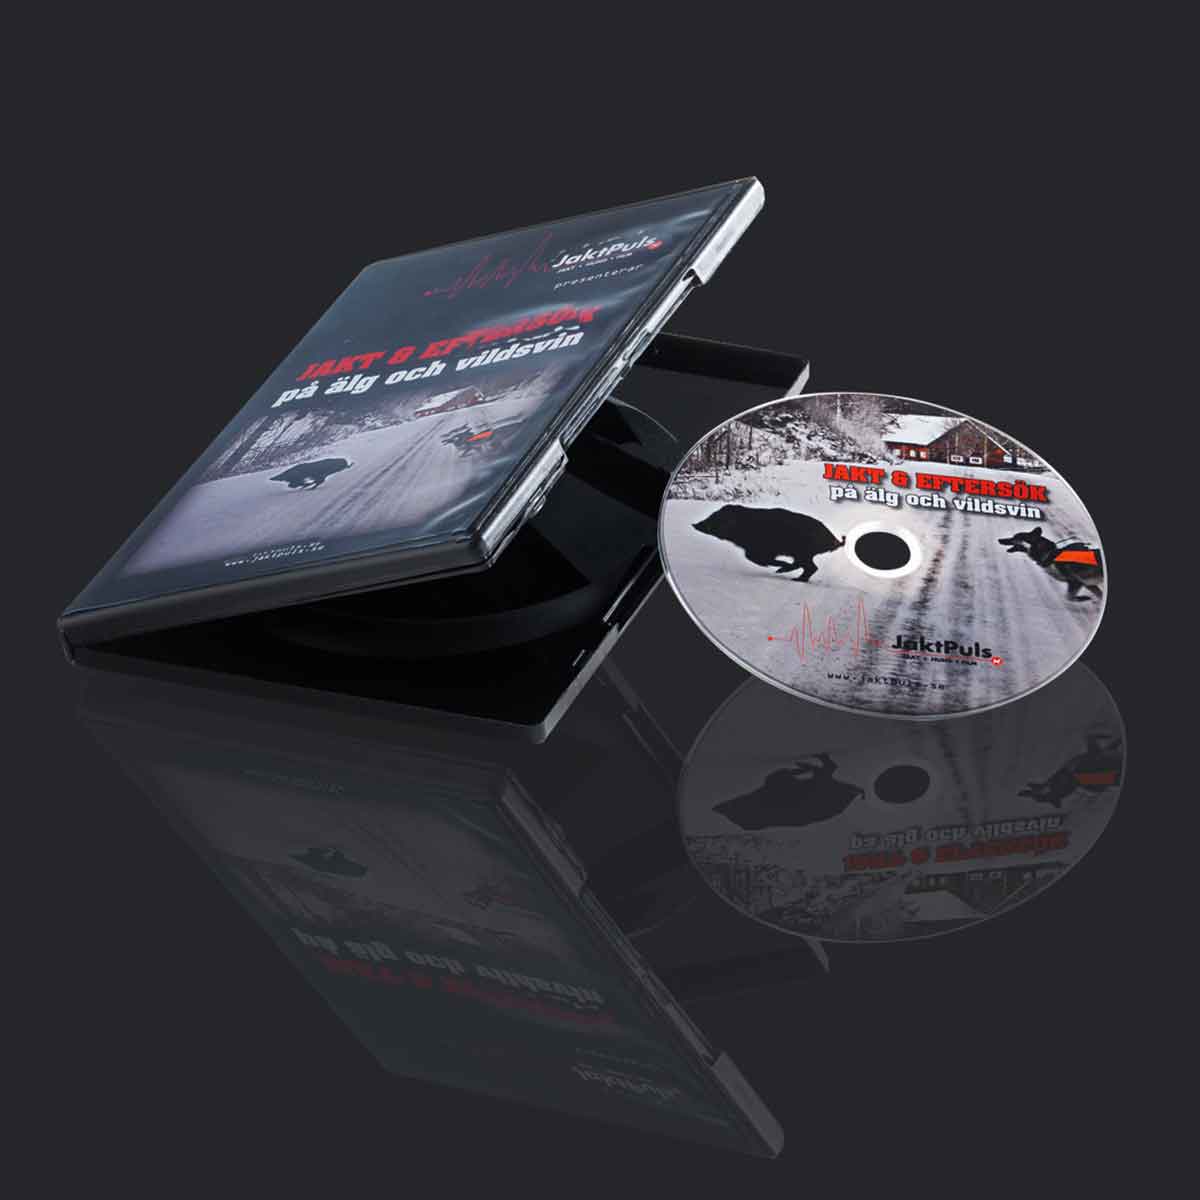 Discrepublic Manufacture Copying Pressing Burning Of Cd Dvd And Pressing Vinyl Records Lp